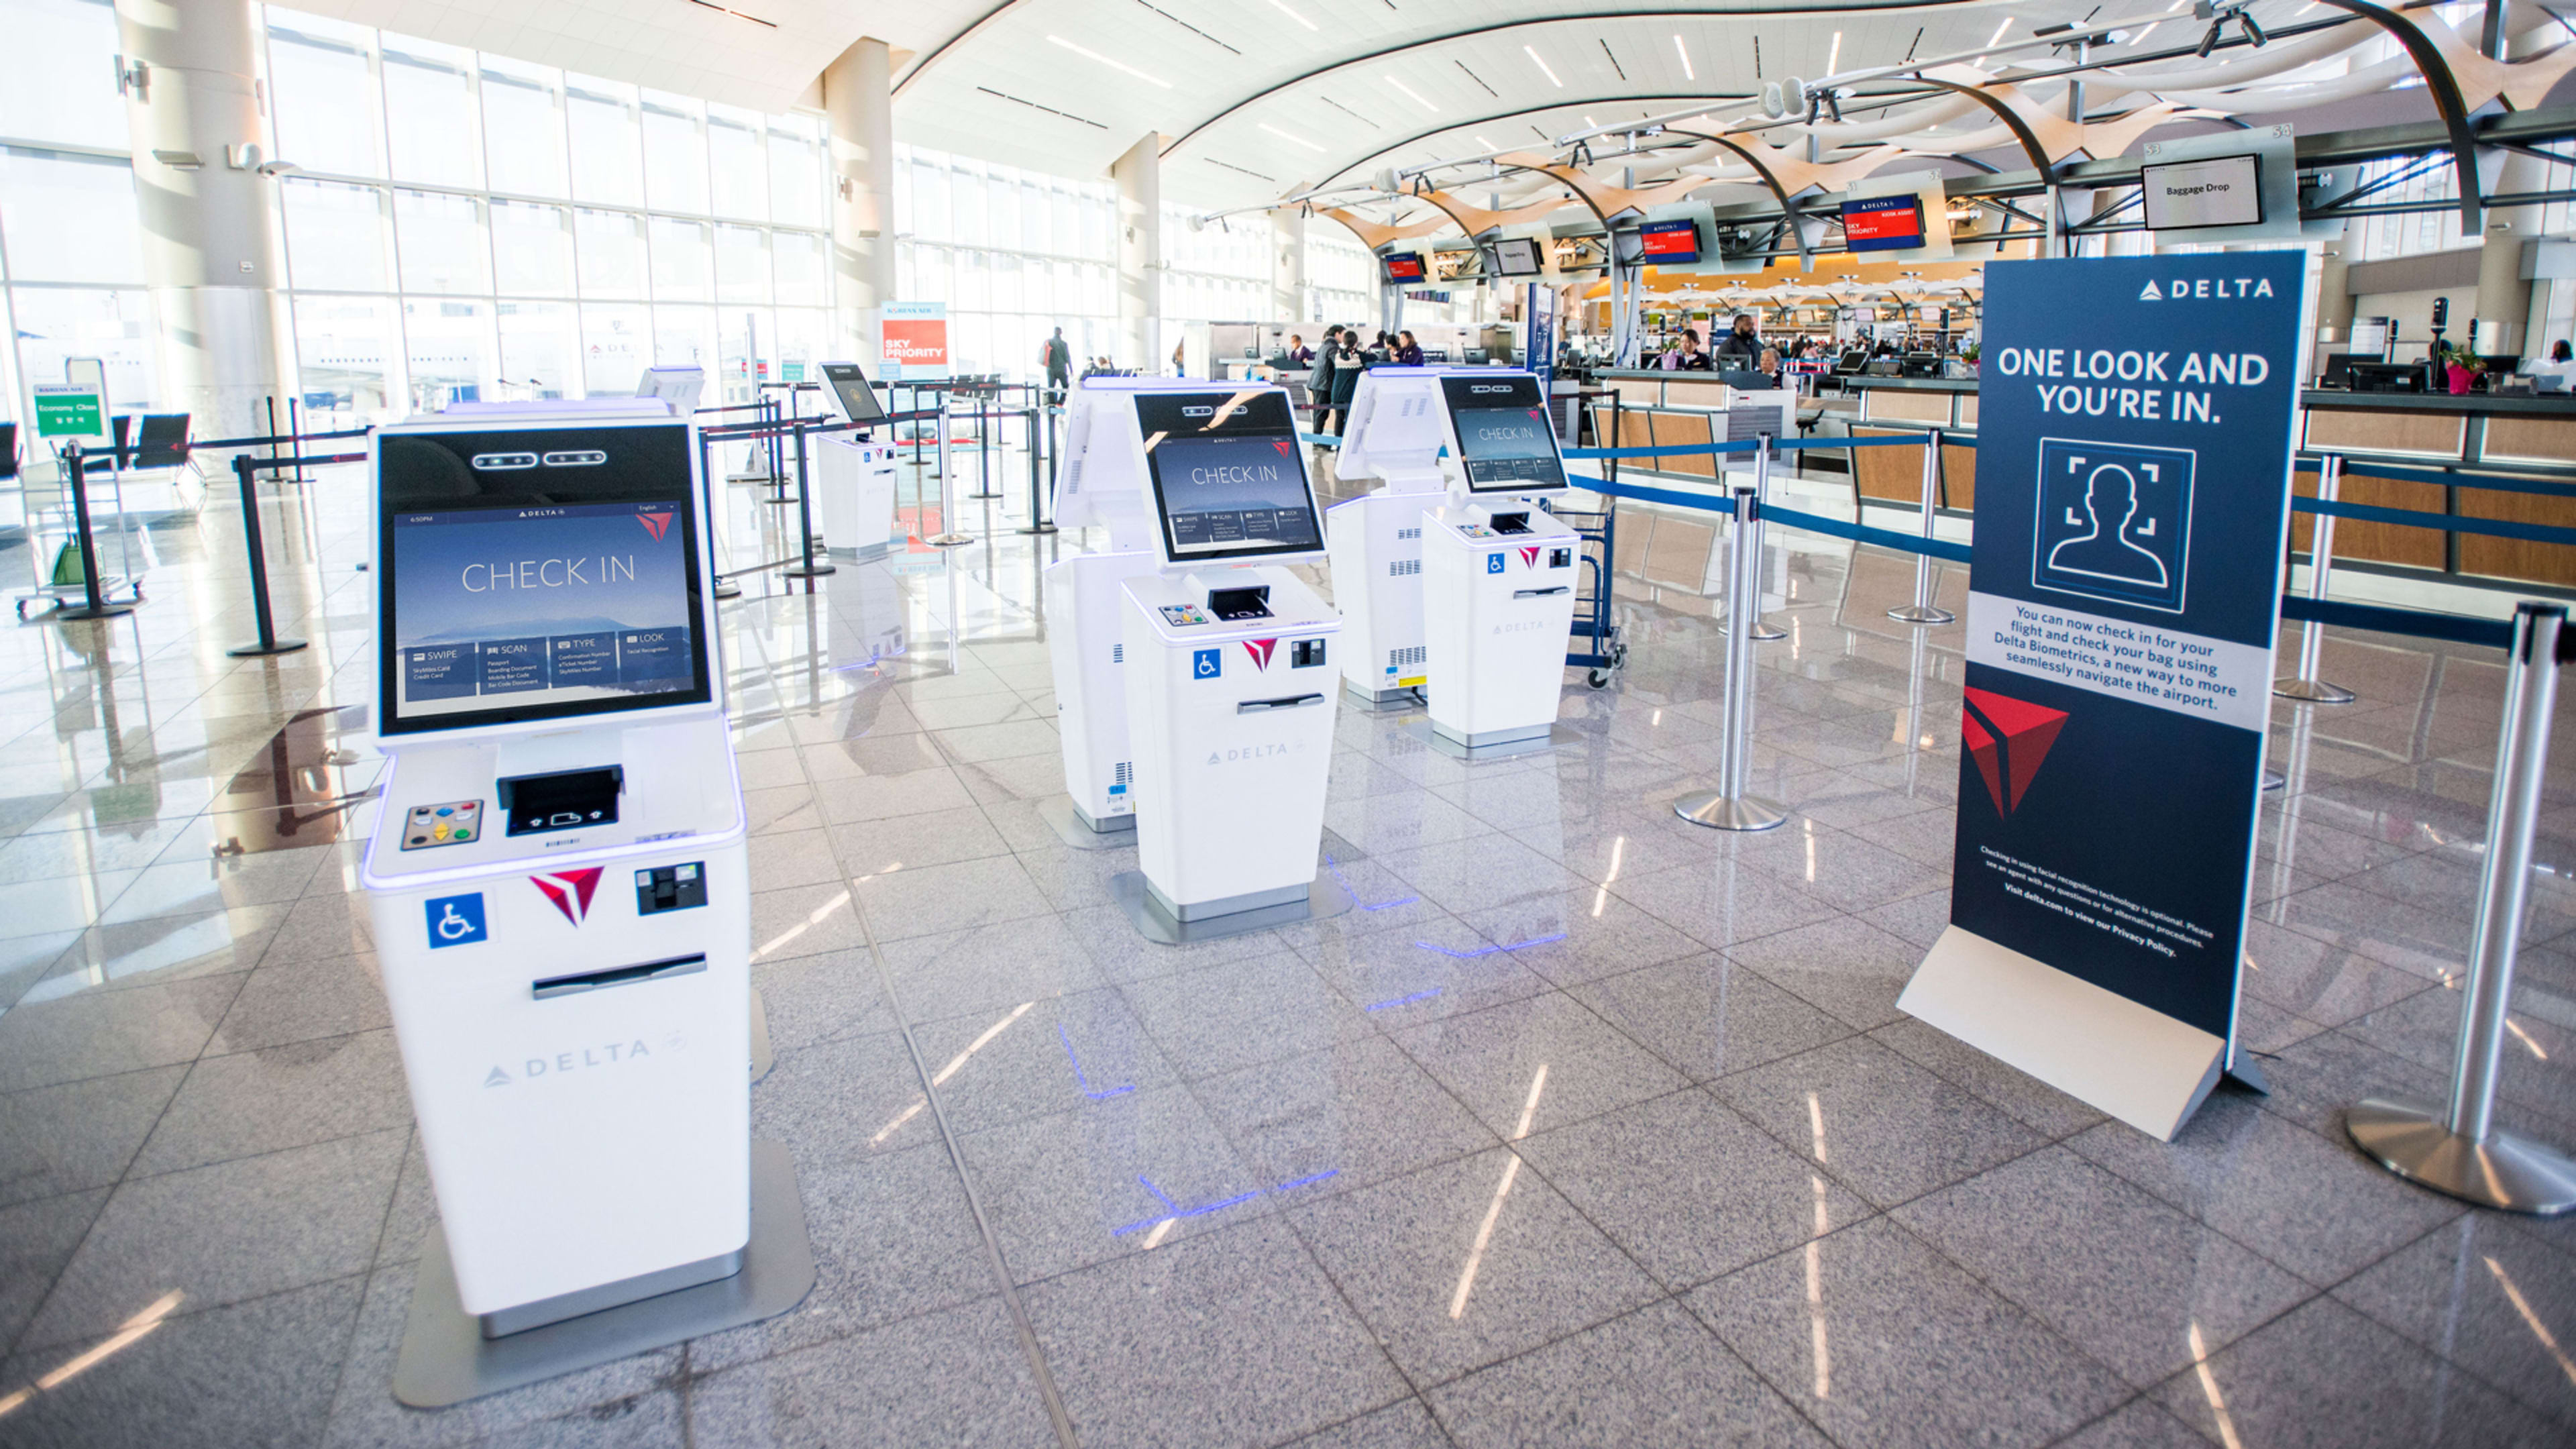 Here’s a look at Delta’s all-seeing, face-scanning, biometric airline terminal